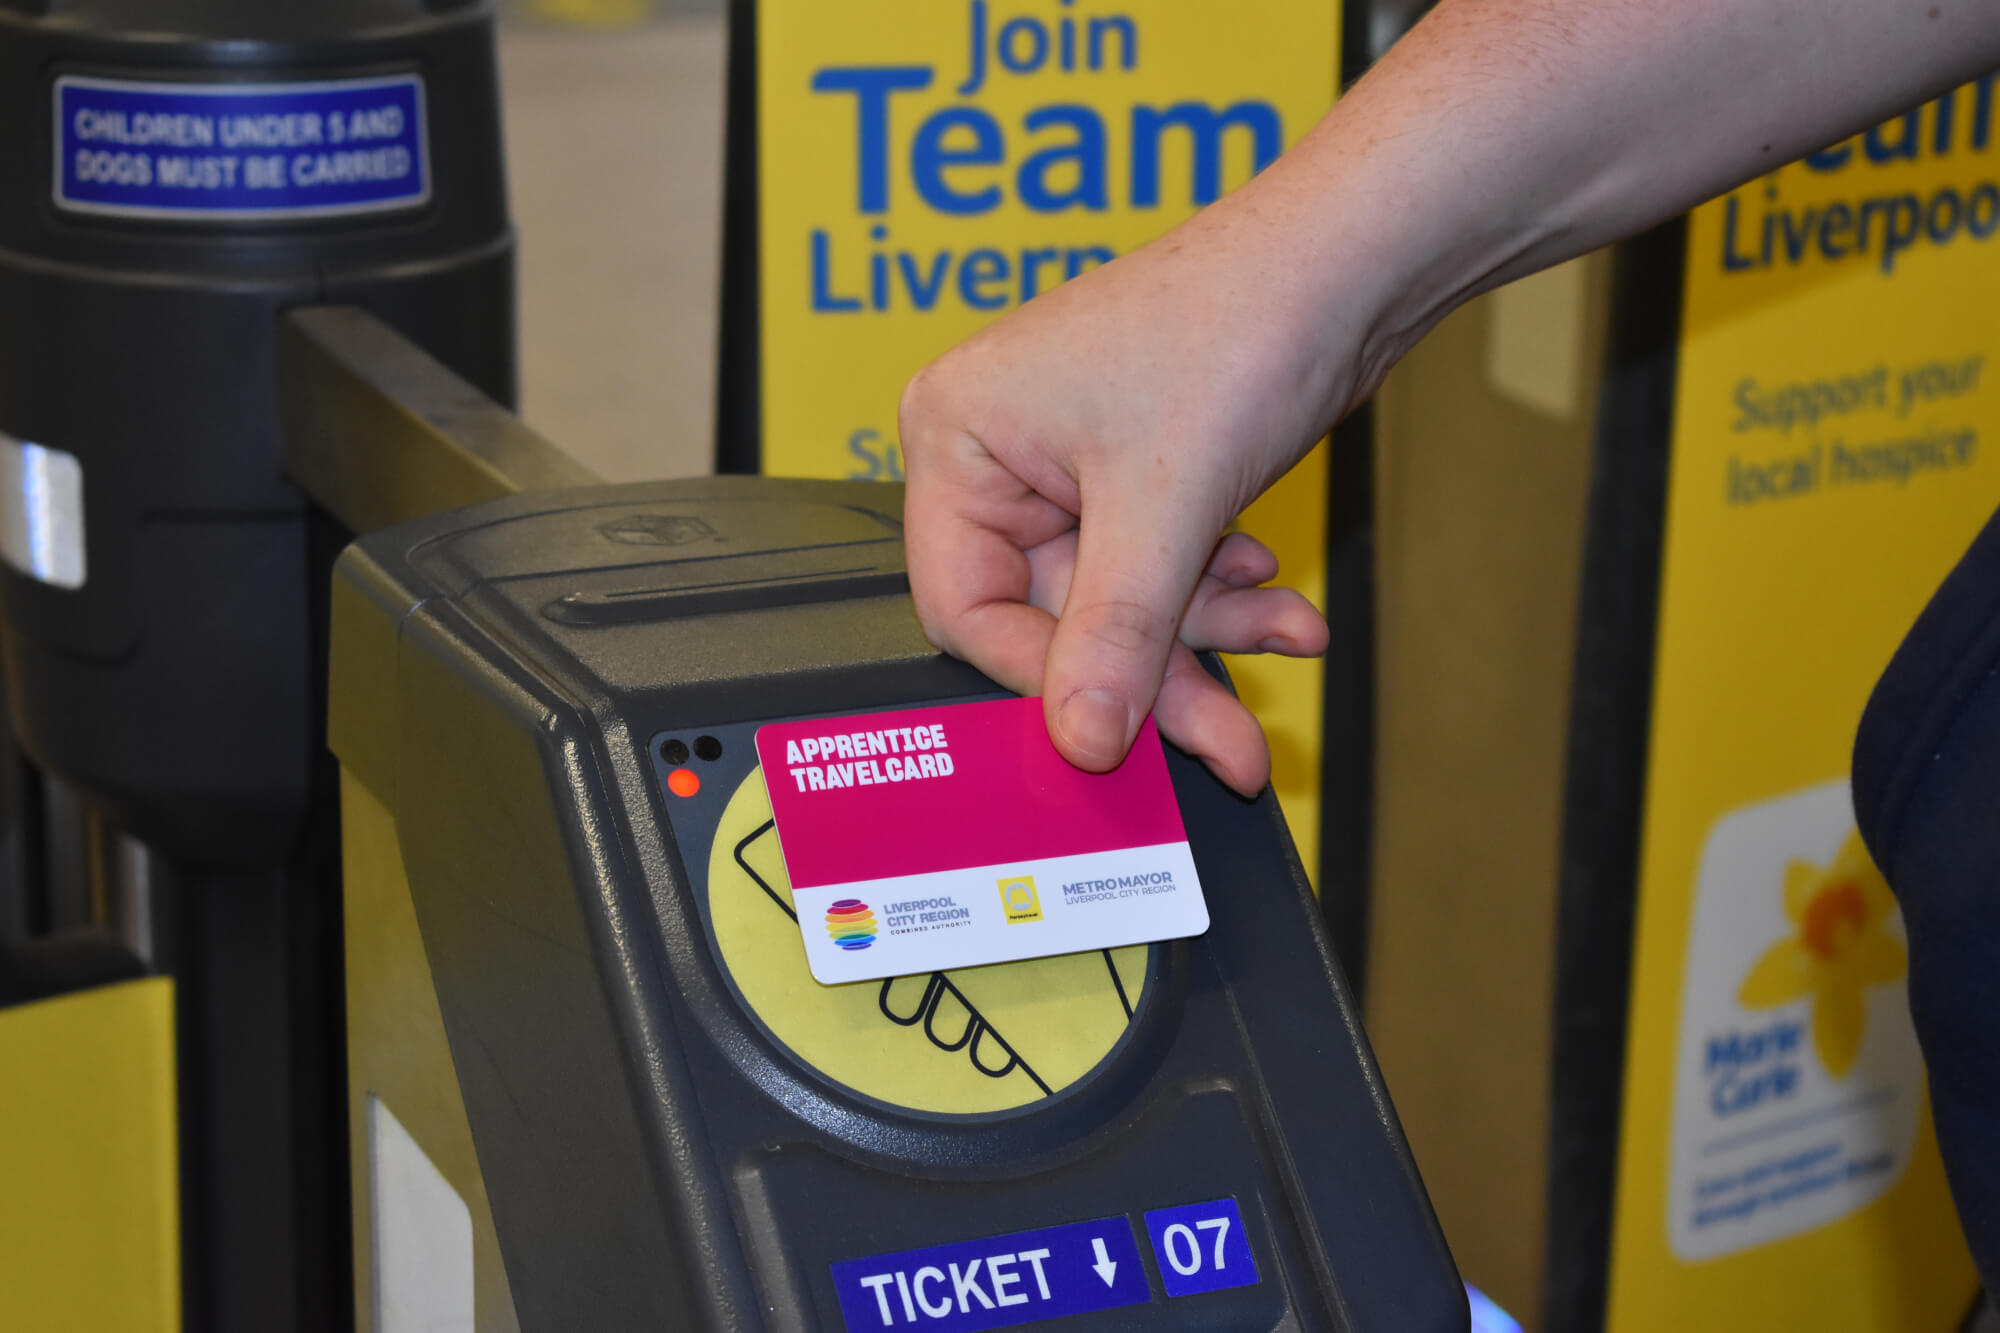 Merseytravel Apprentice Travelcard being tapped at ticket toll